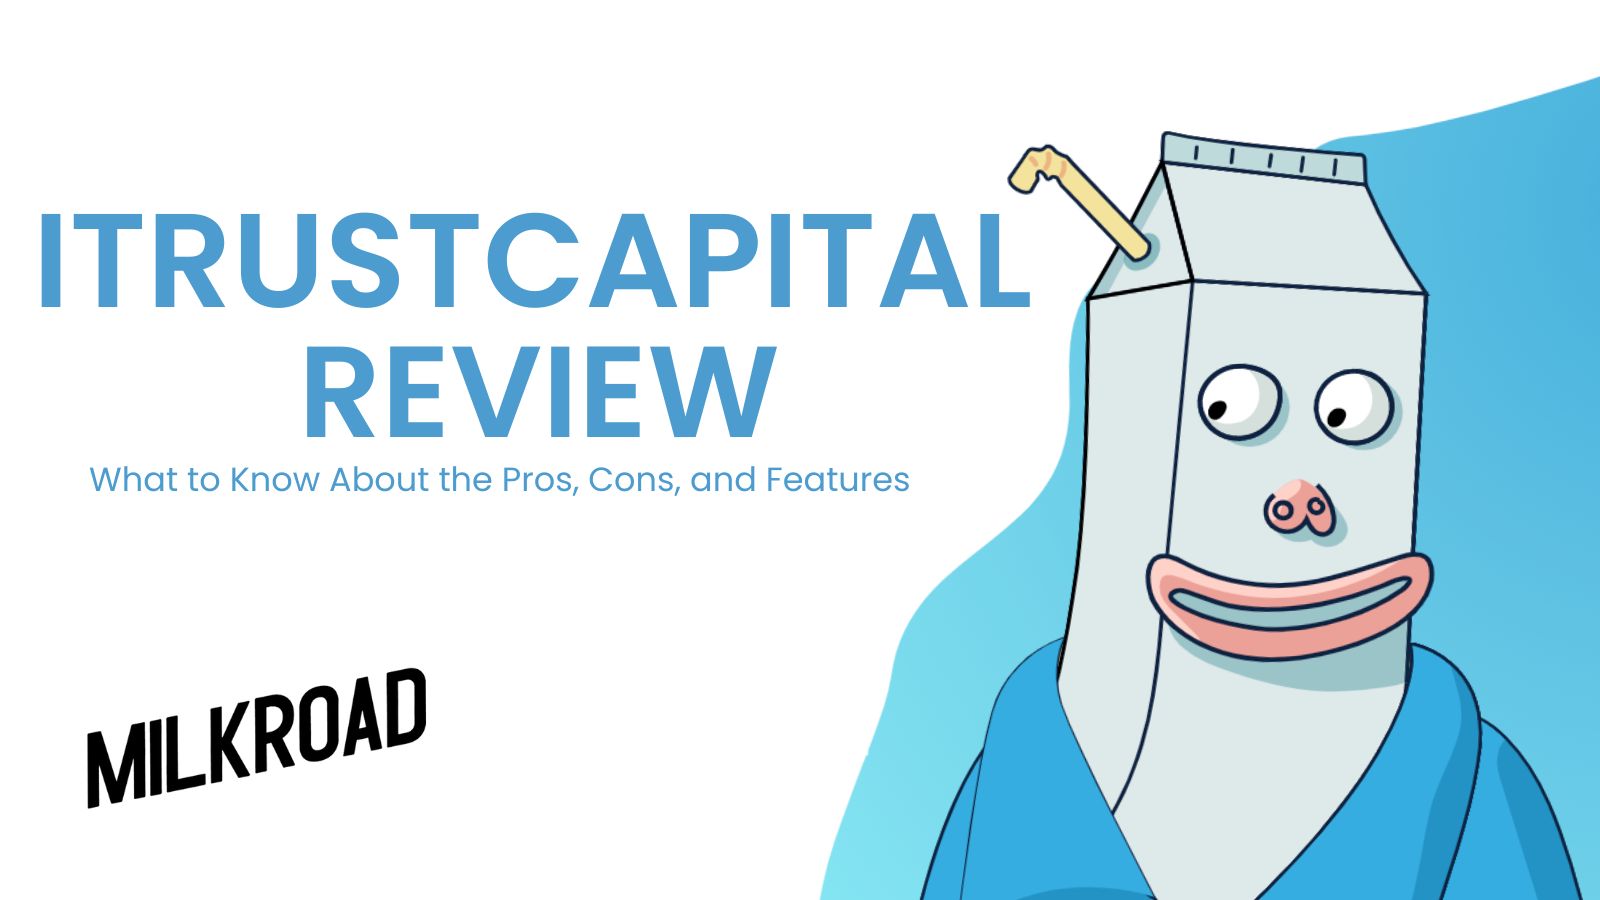 iTrustcapital Review